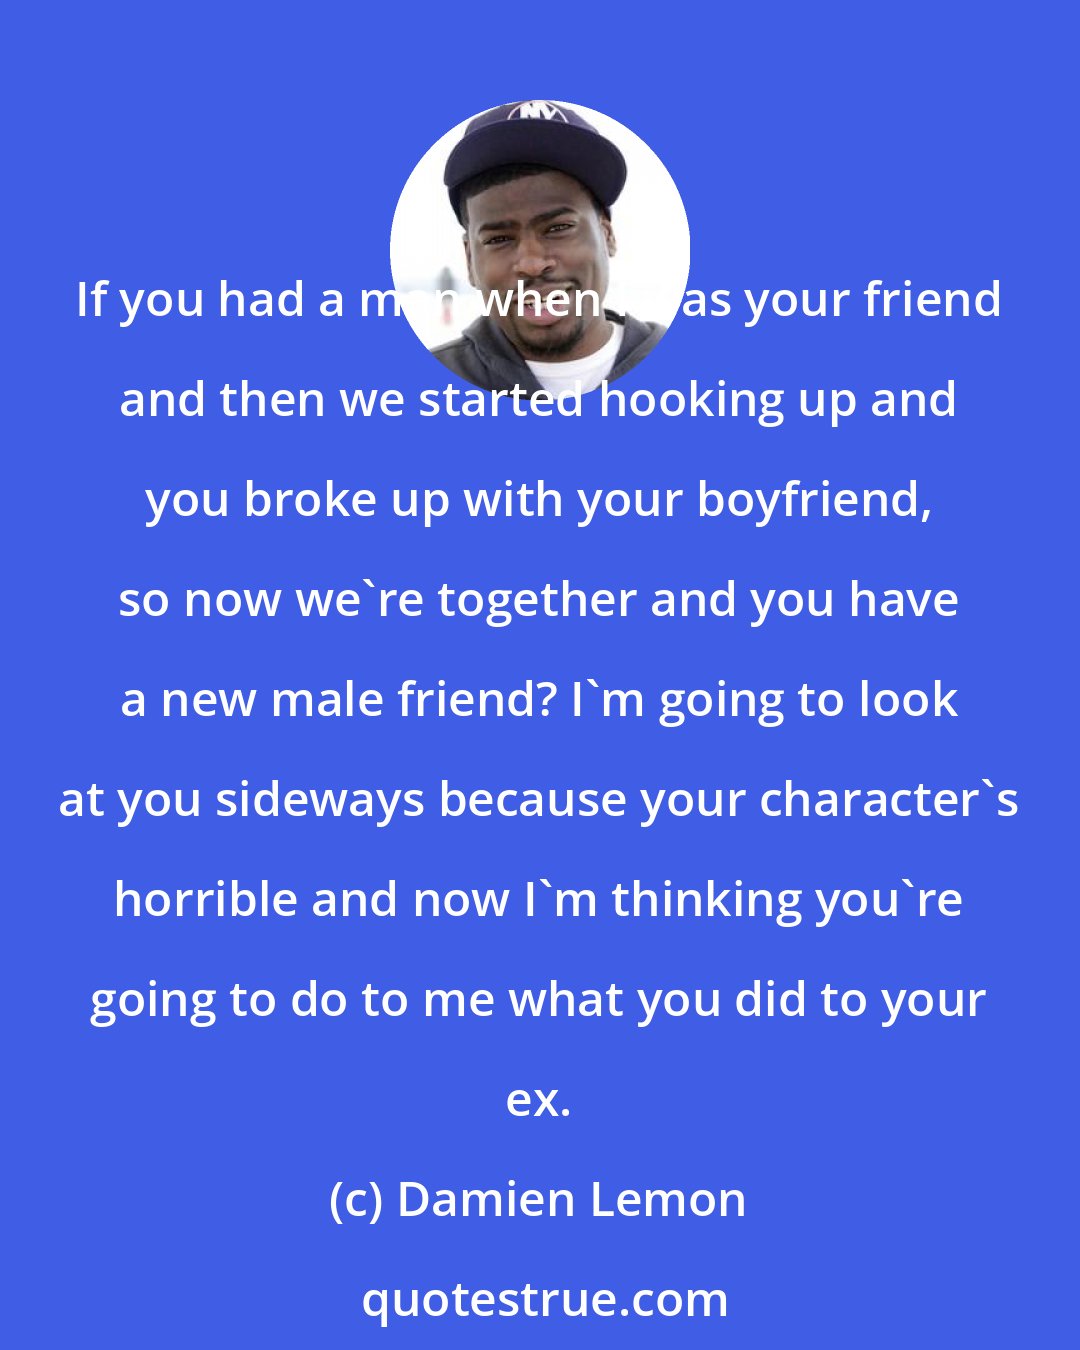 Damien Lemon: If you had a man when I was your friend and then we started hooking up and you broke up with your boyfriend, so now we're together and you have a new male friend? I'm going to look at you sideways because your character's horrible and now I'm thinking you're going to do to me what you did to your ex.